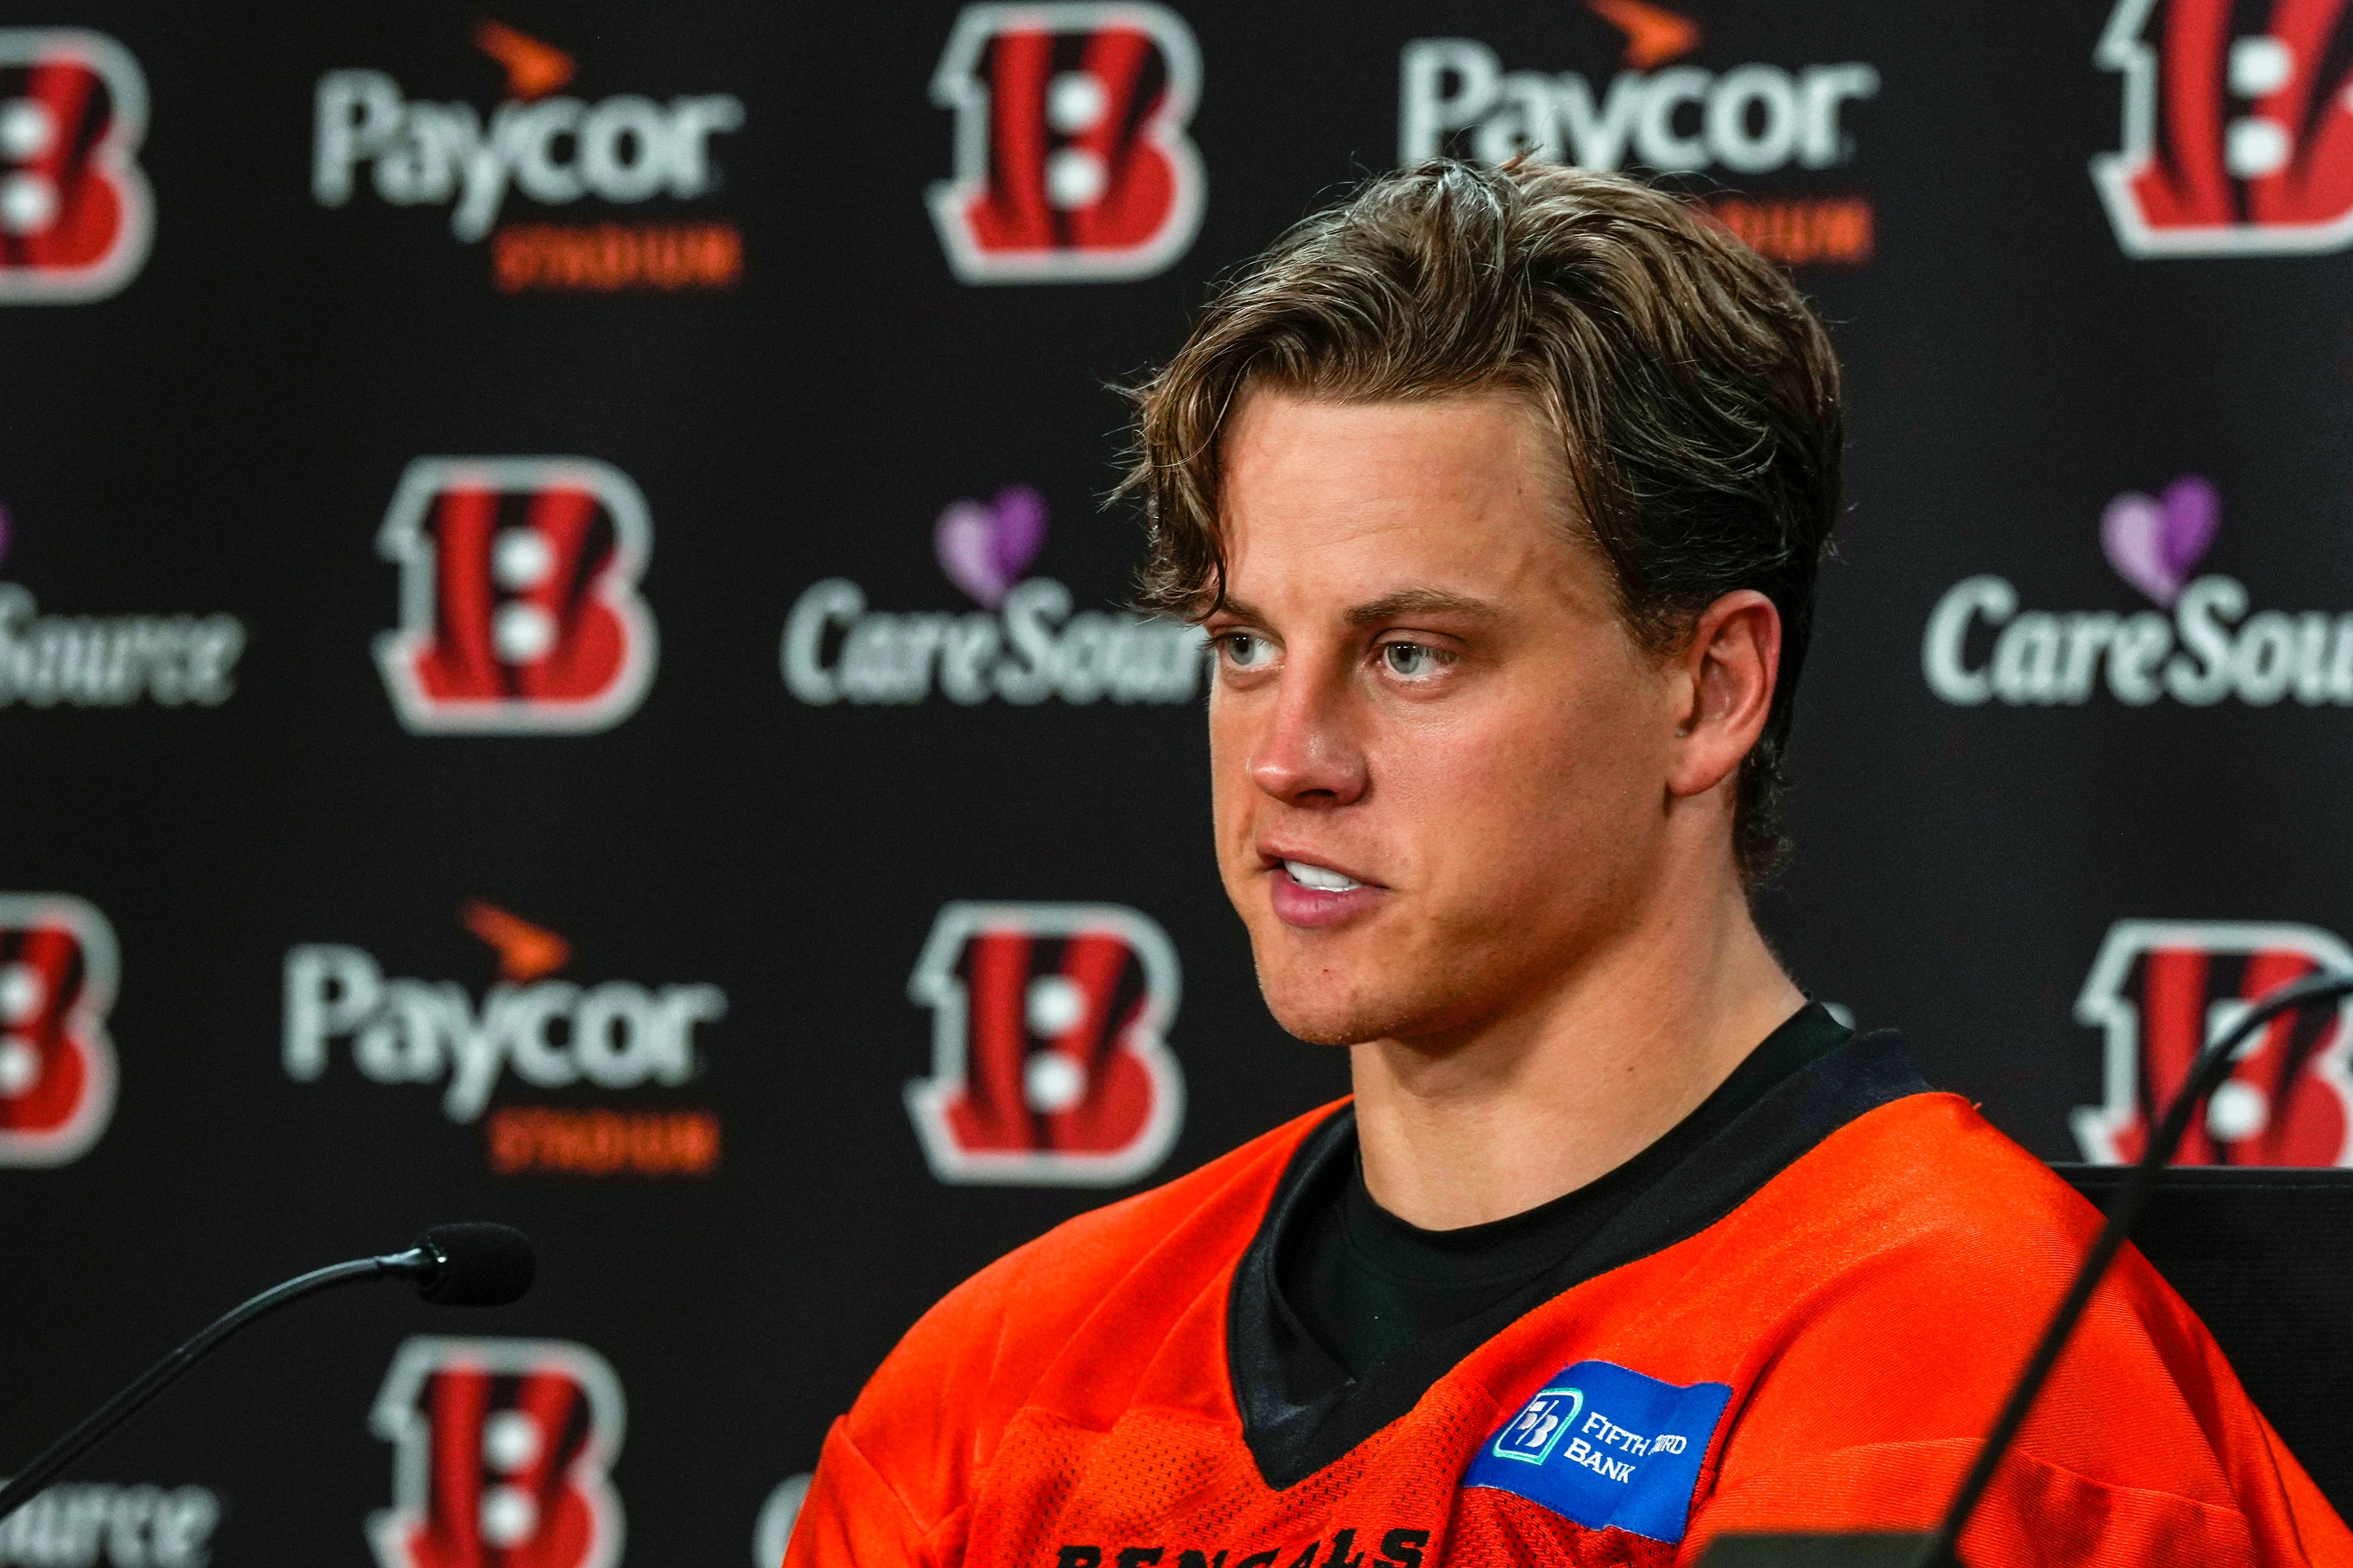 Fact check: Does Joe Burrow really have long hair? We solved mystery of viral photo